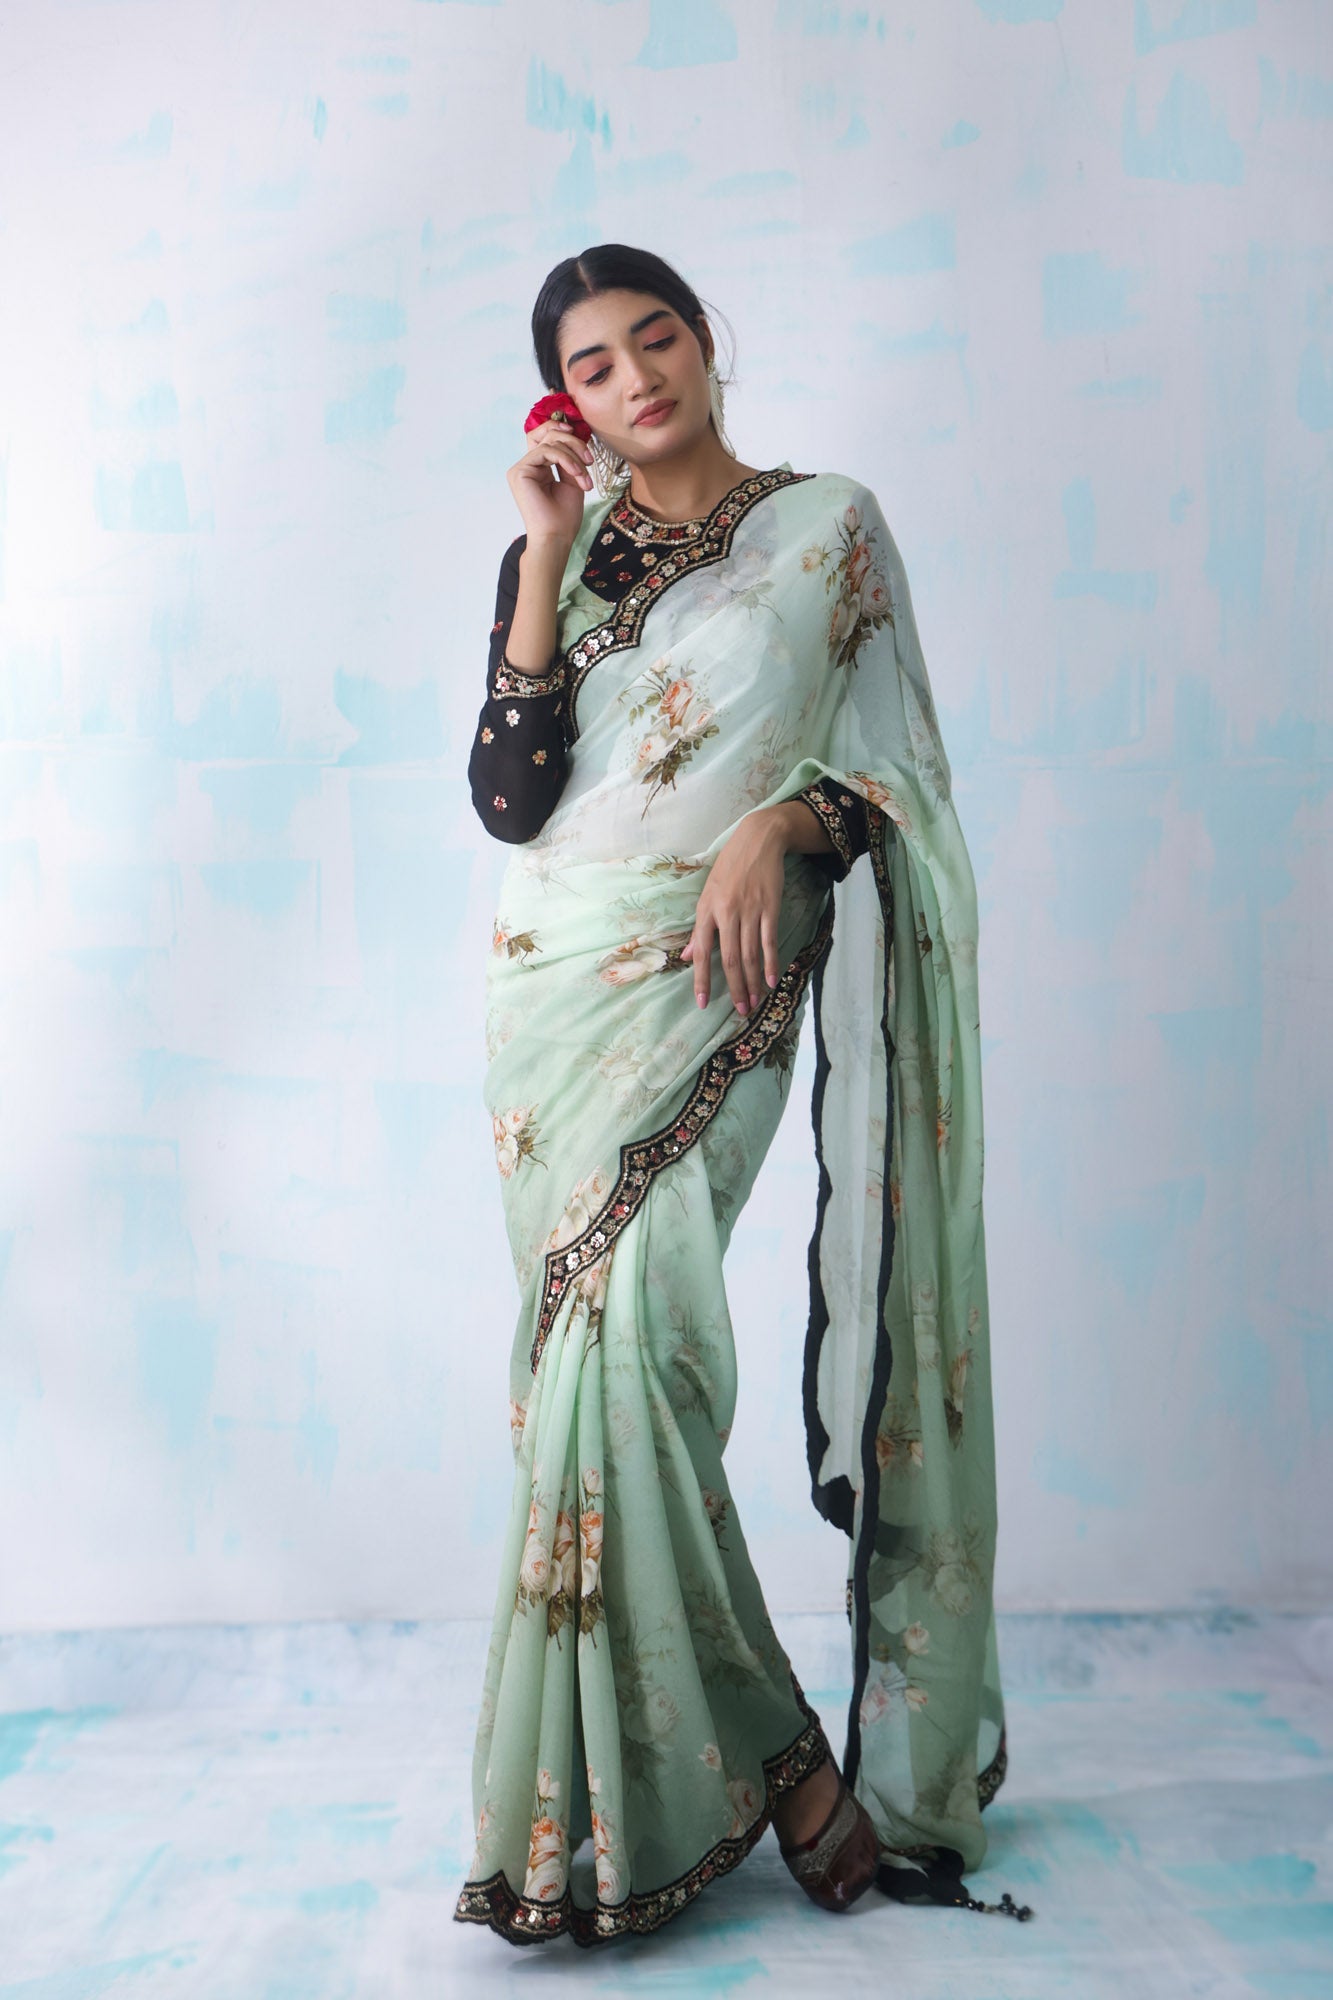 Natalie - Ombre Green Floral Sari with embroidery